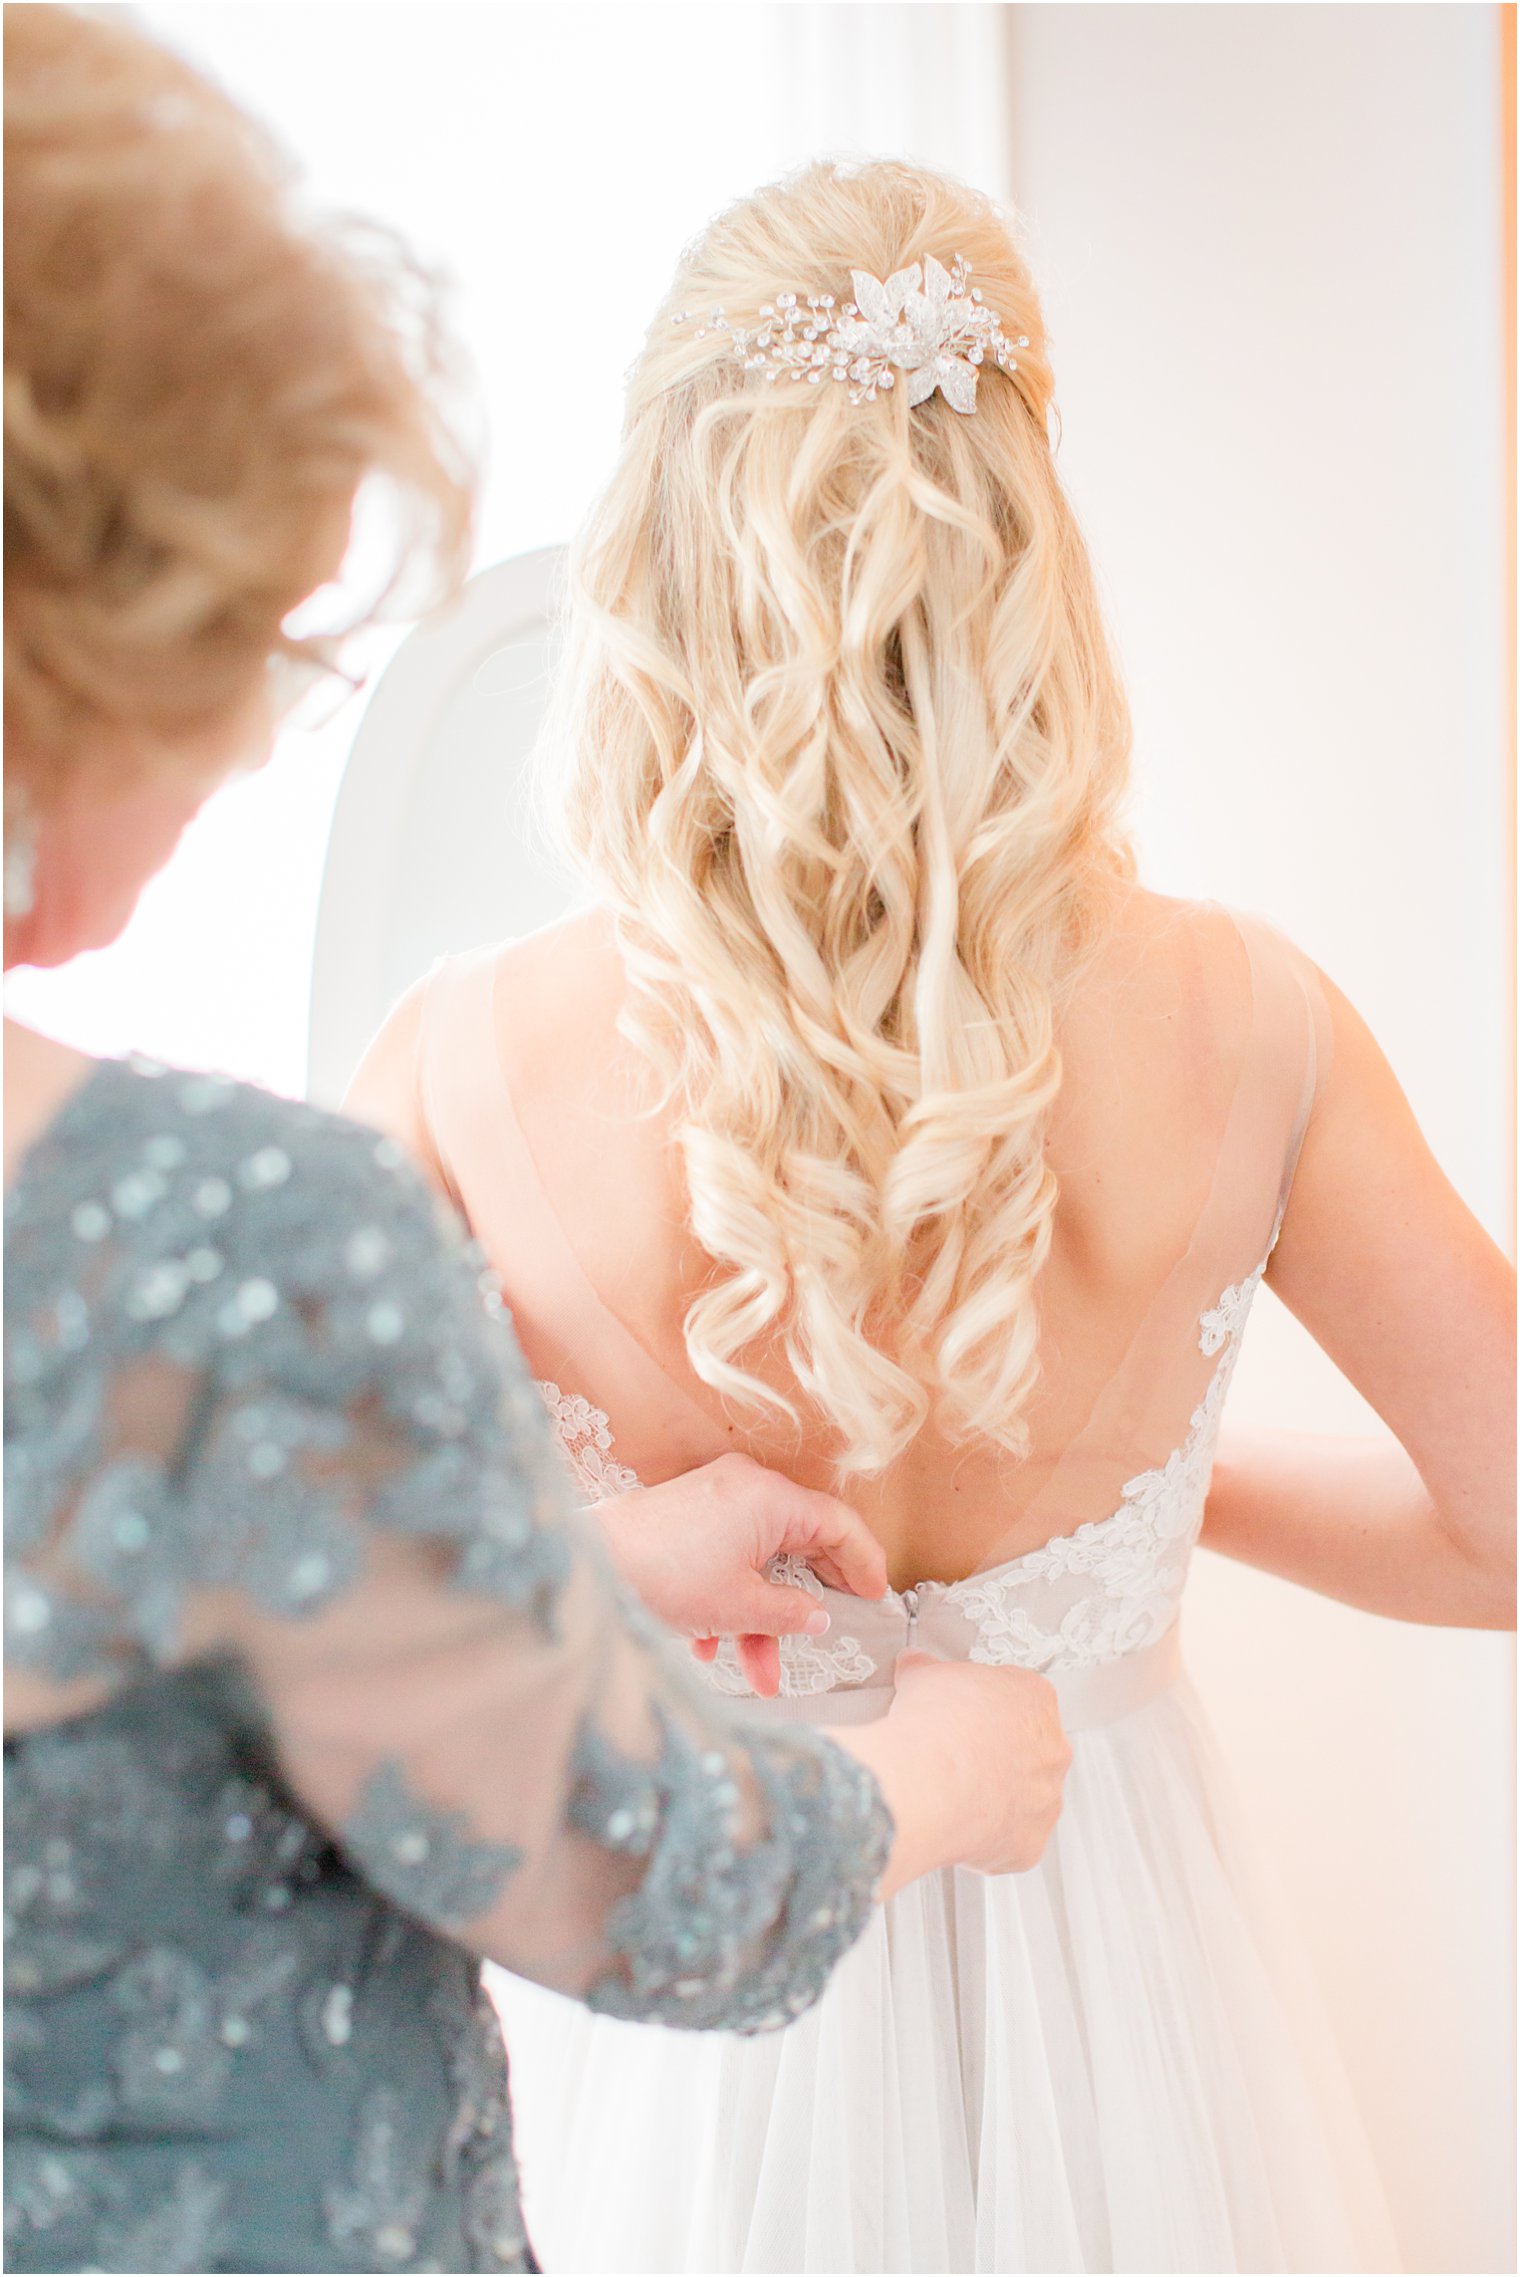 bride getting ready with her mother on wedding day